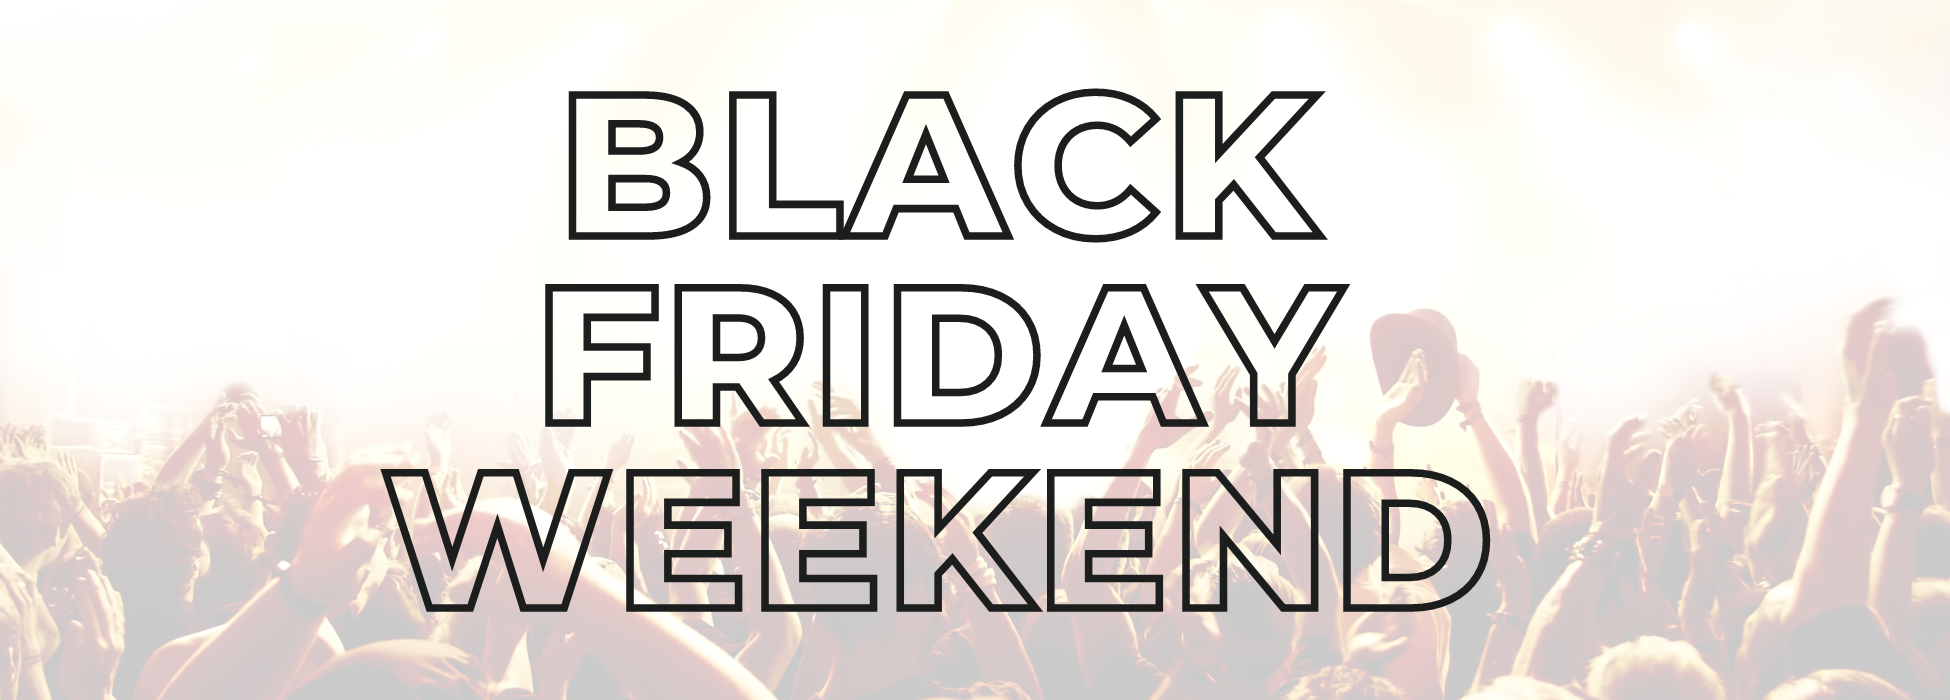 Black Friday  Sale  (1950 x 700 px) (1).png